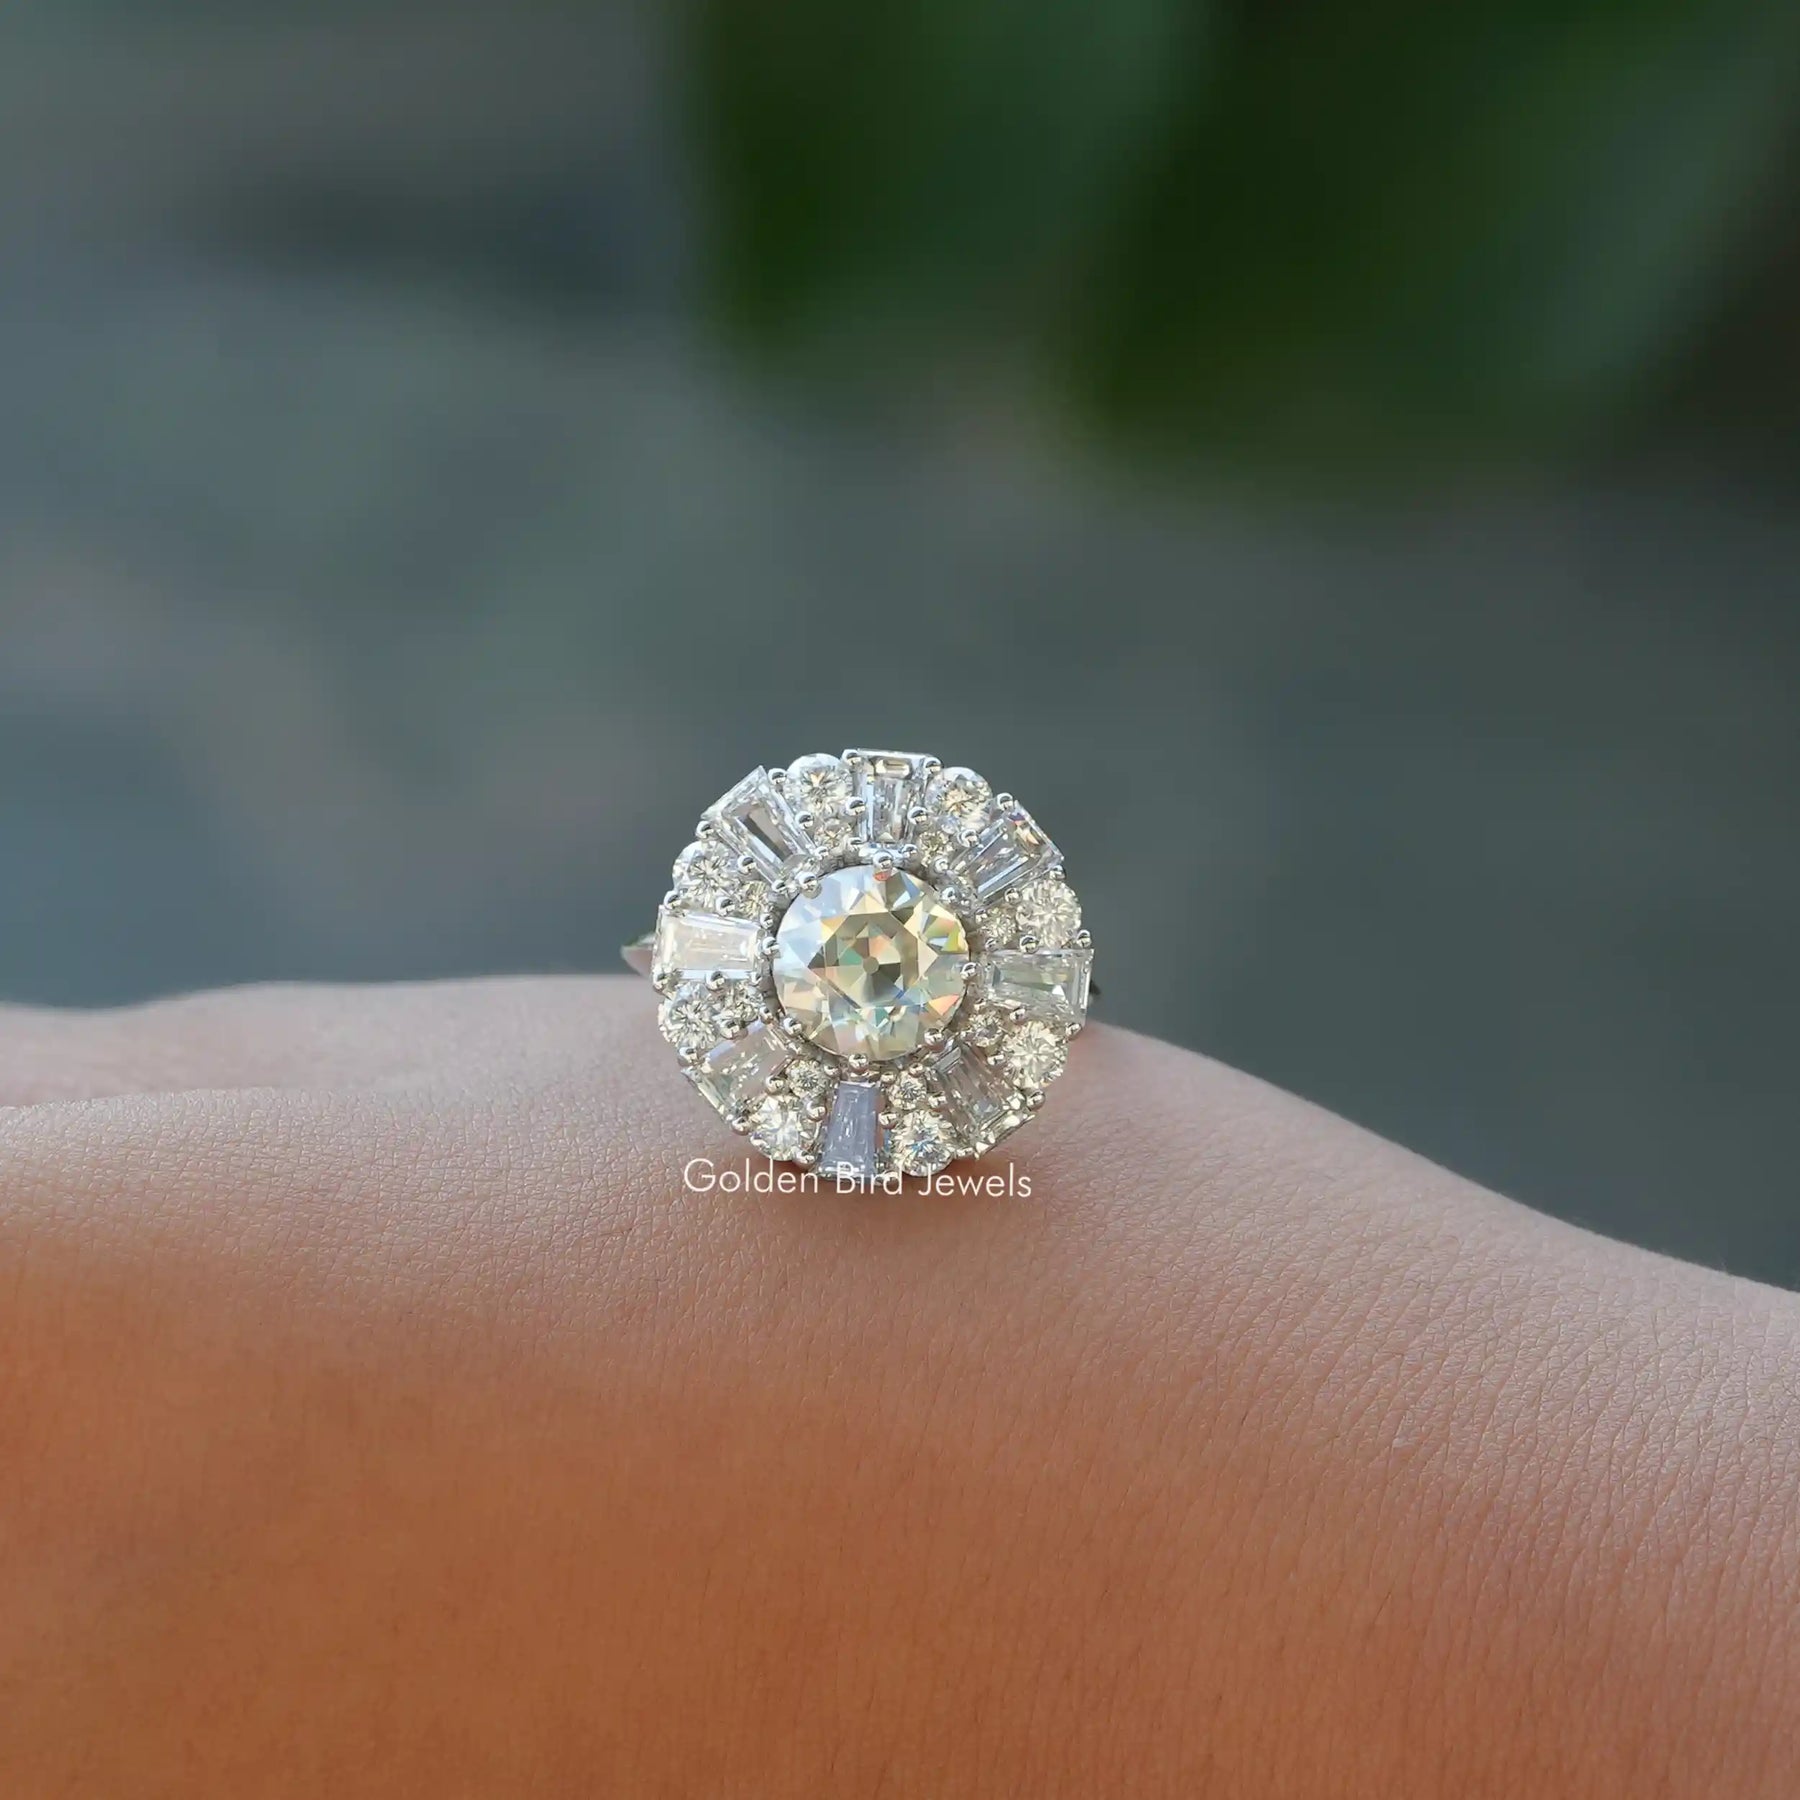 [This moissanite cluster ring made of halo design setting]-[Golden Bird Jewels]